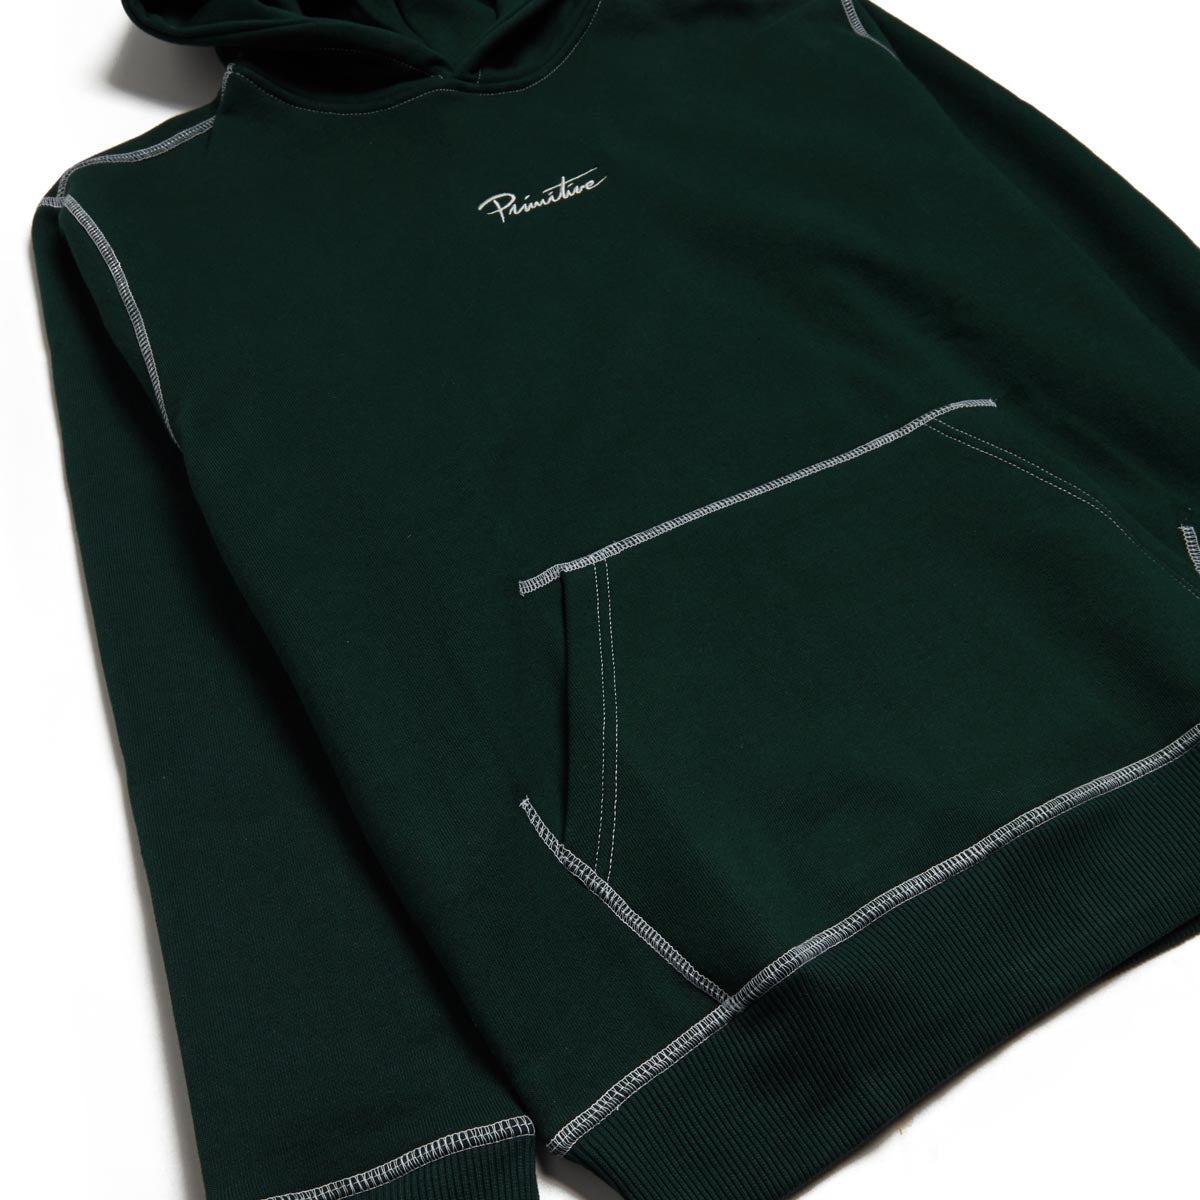 Primitive Contra Hoodie - Forest Green image 3